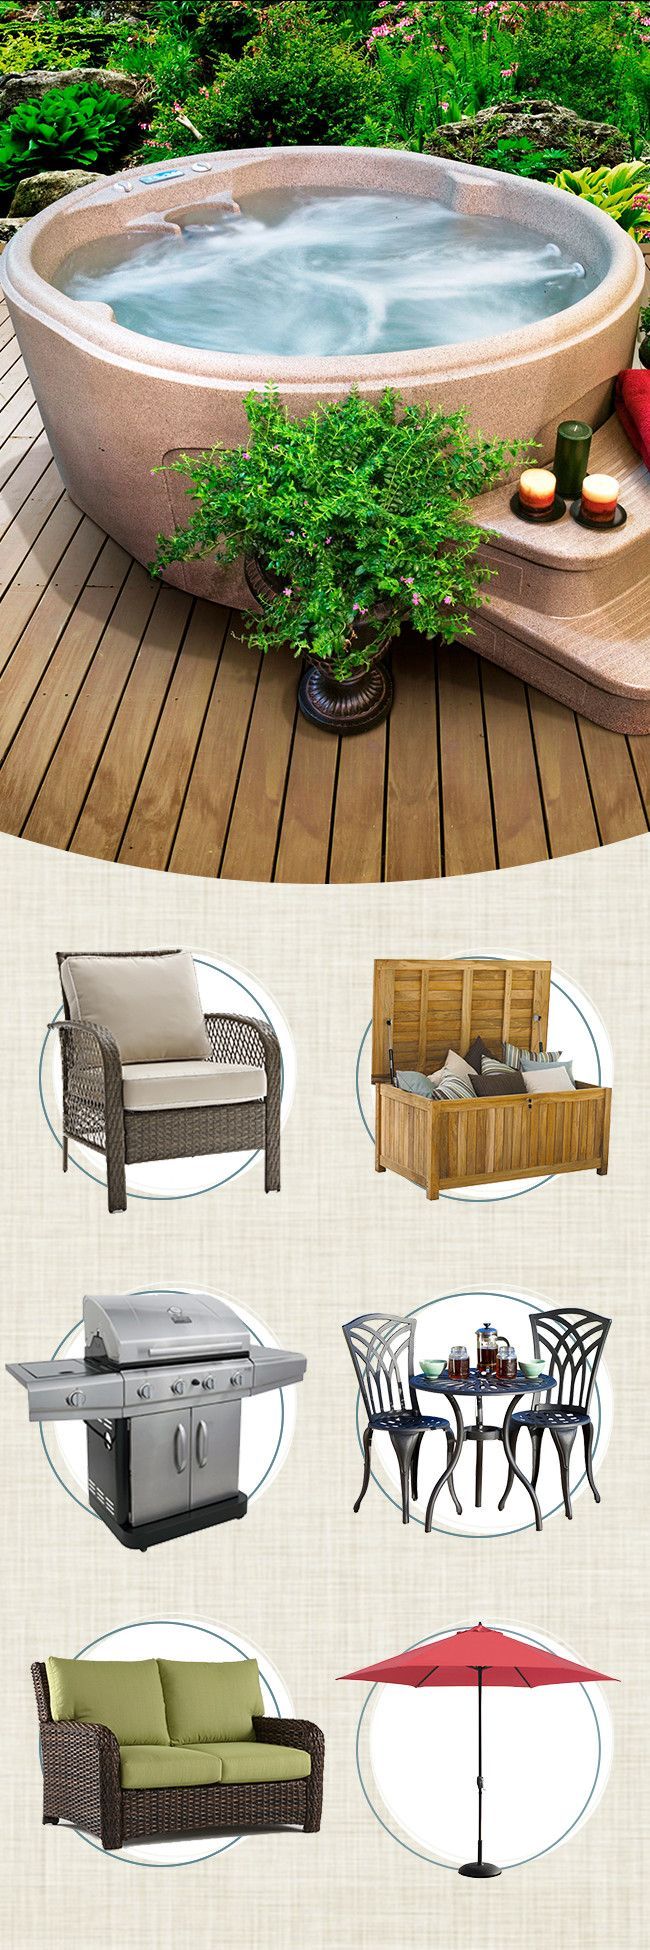 Whatever the size and style you're looking for, browse our selection of first rate above ground pools and tubs. Relax in style with a wide selection of outdoor furniture and more. Visit Wayfair and sign up today to get access to exclusive deals everyday up to 70% off. Free shipping on all orders over $49. -   19 plants Climbing decks
 ideas